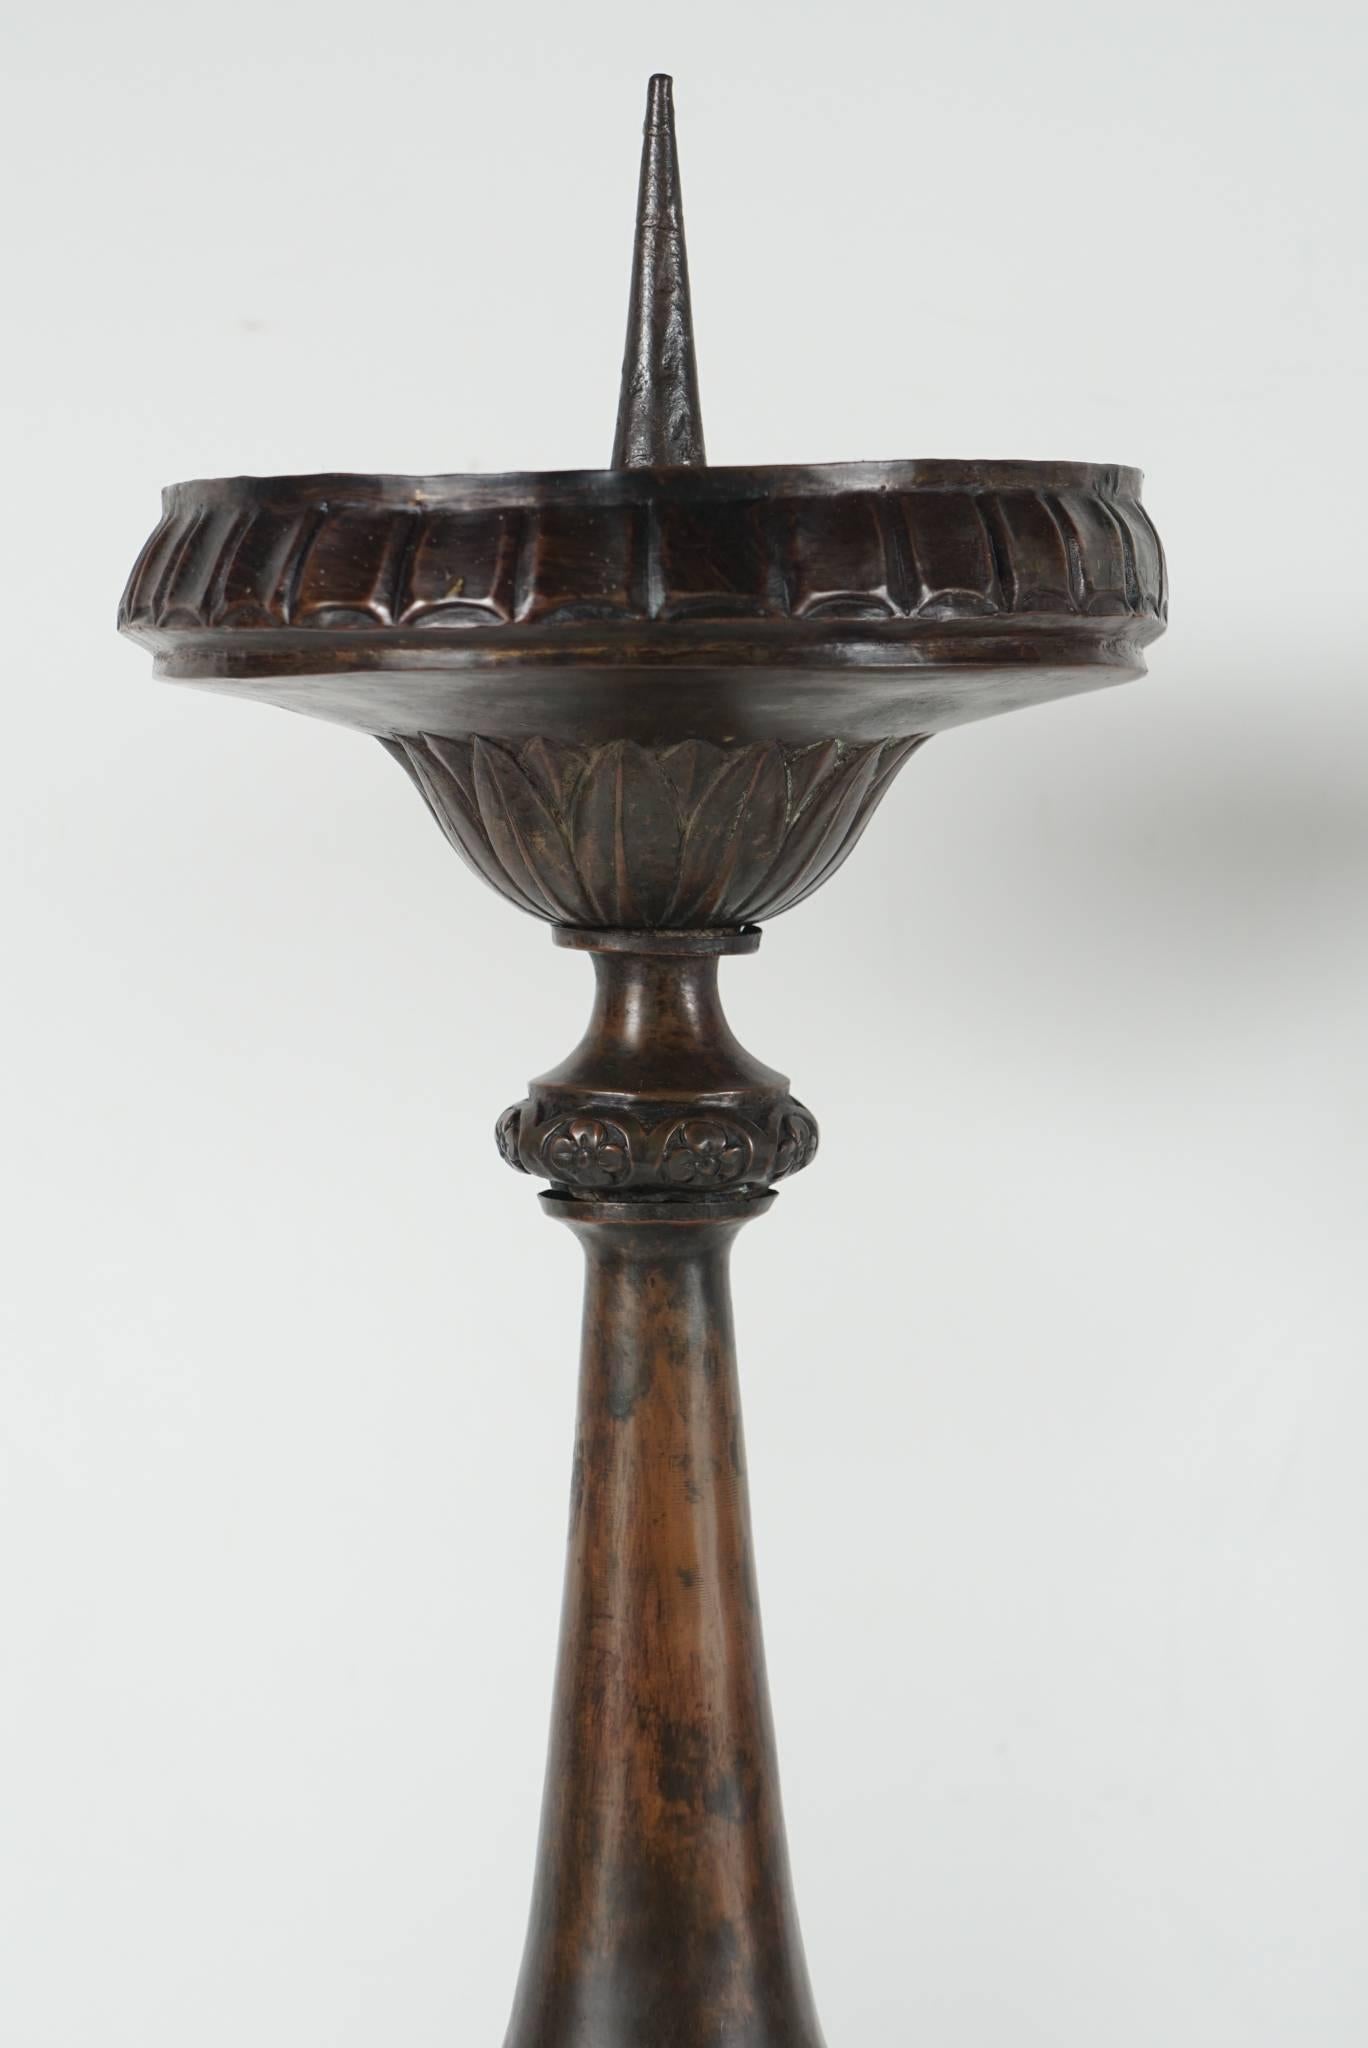 This pair of large and impressive pricket candlesticks was made in the Baroque style, circa 1850. Cast as sectioned hollow pieces and fitted over a wooden core the design is built up one on top of the other and then applied repousse decorative